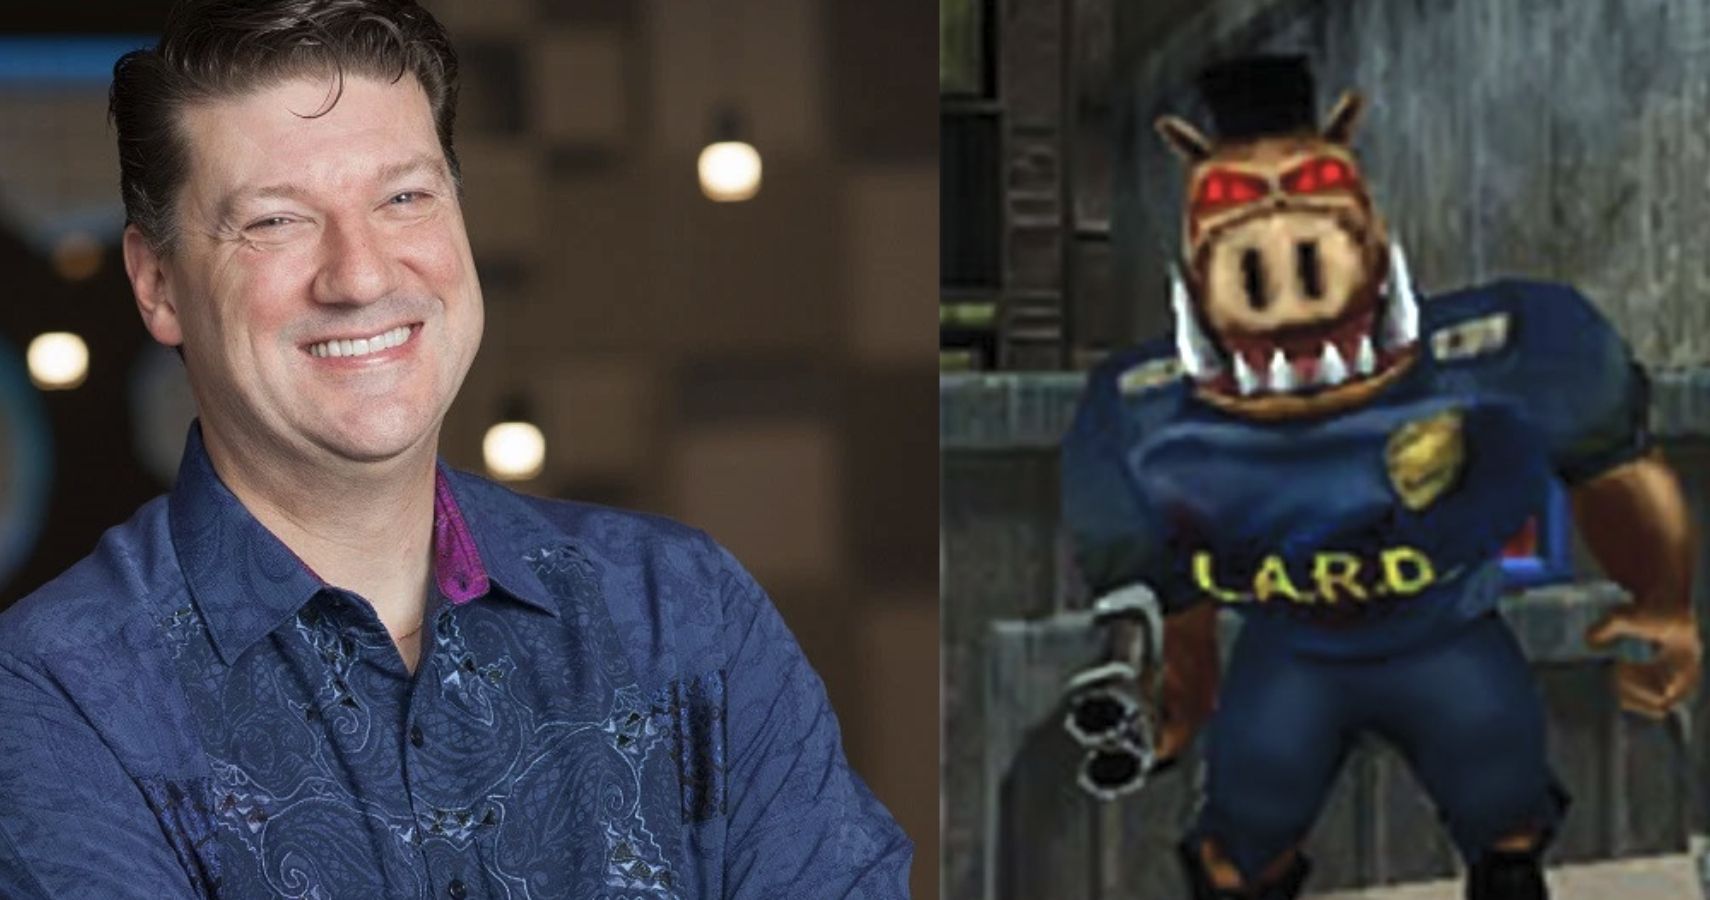 Randy Pitchford Tries To Profit Off Mass Protests